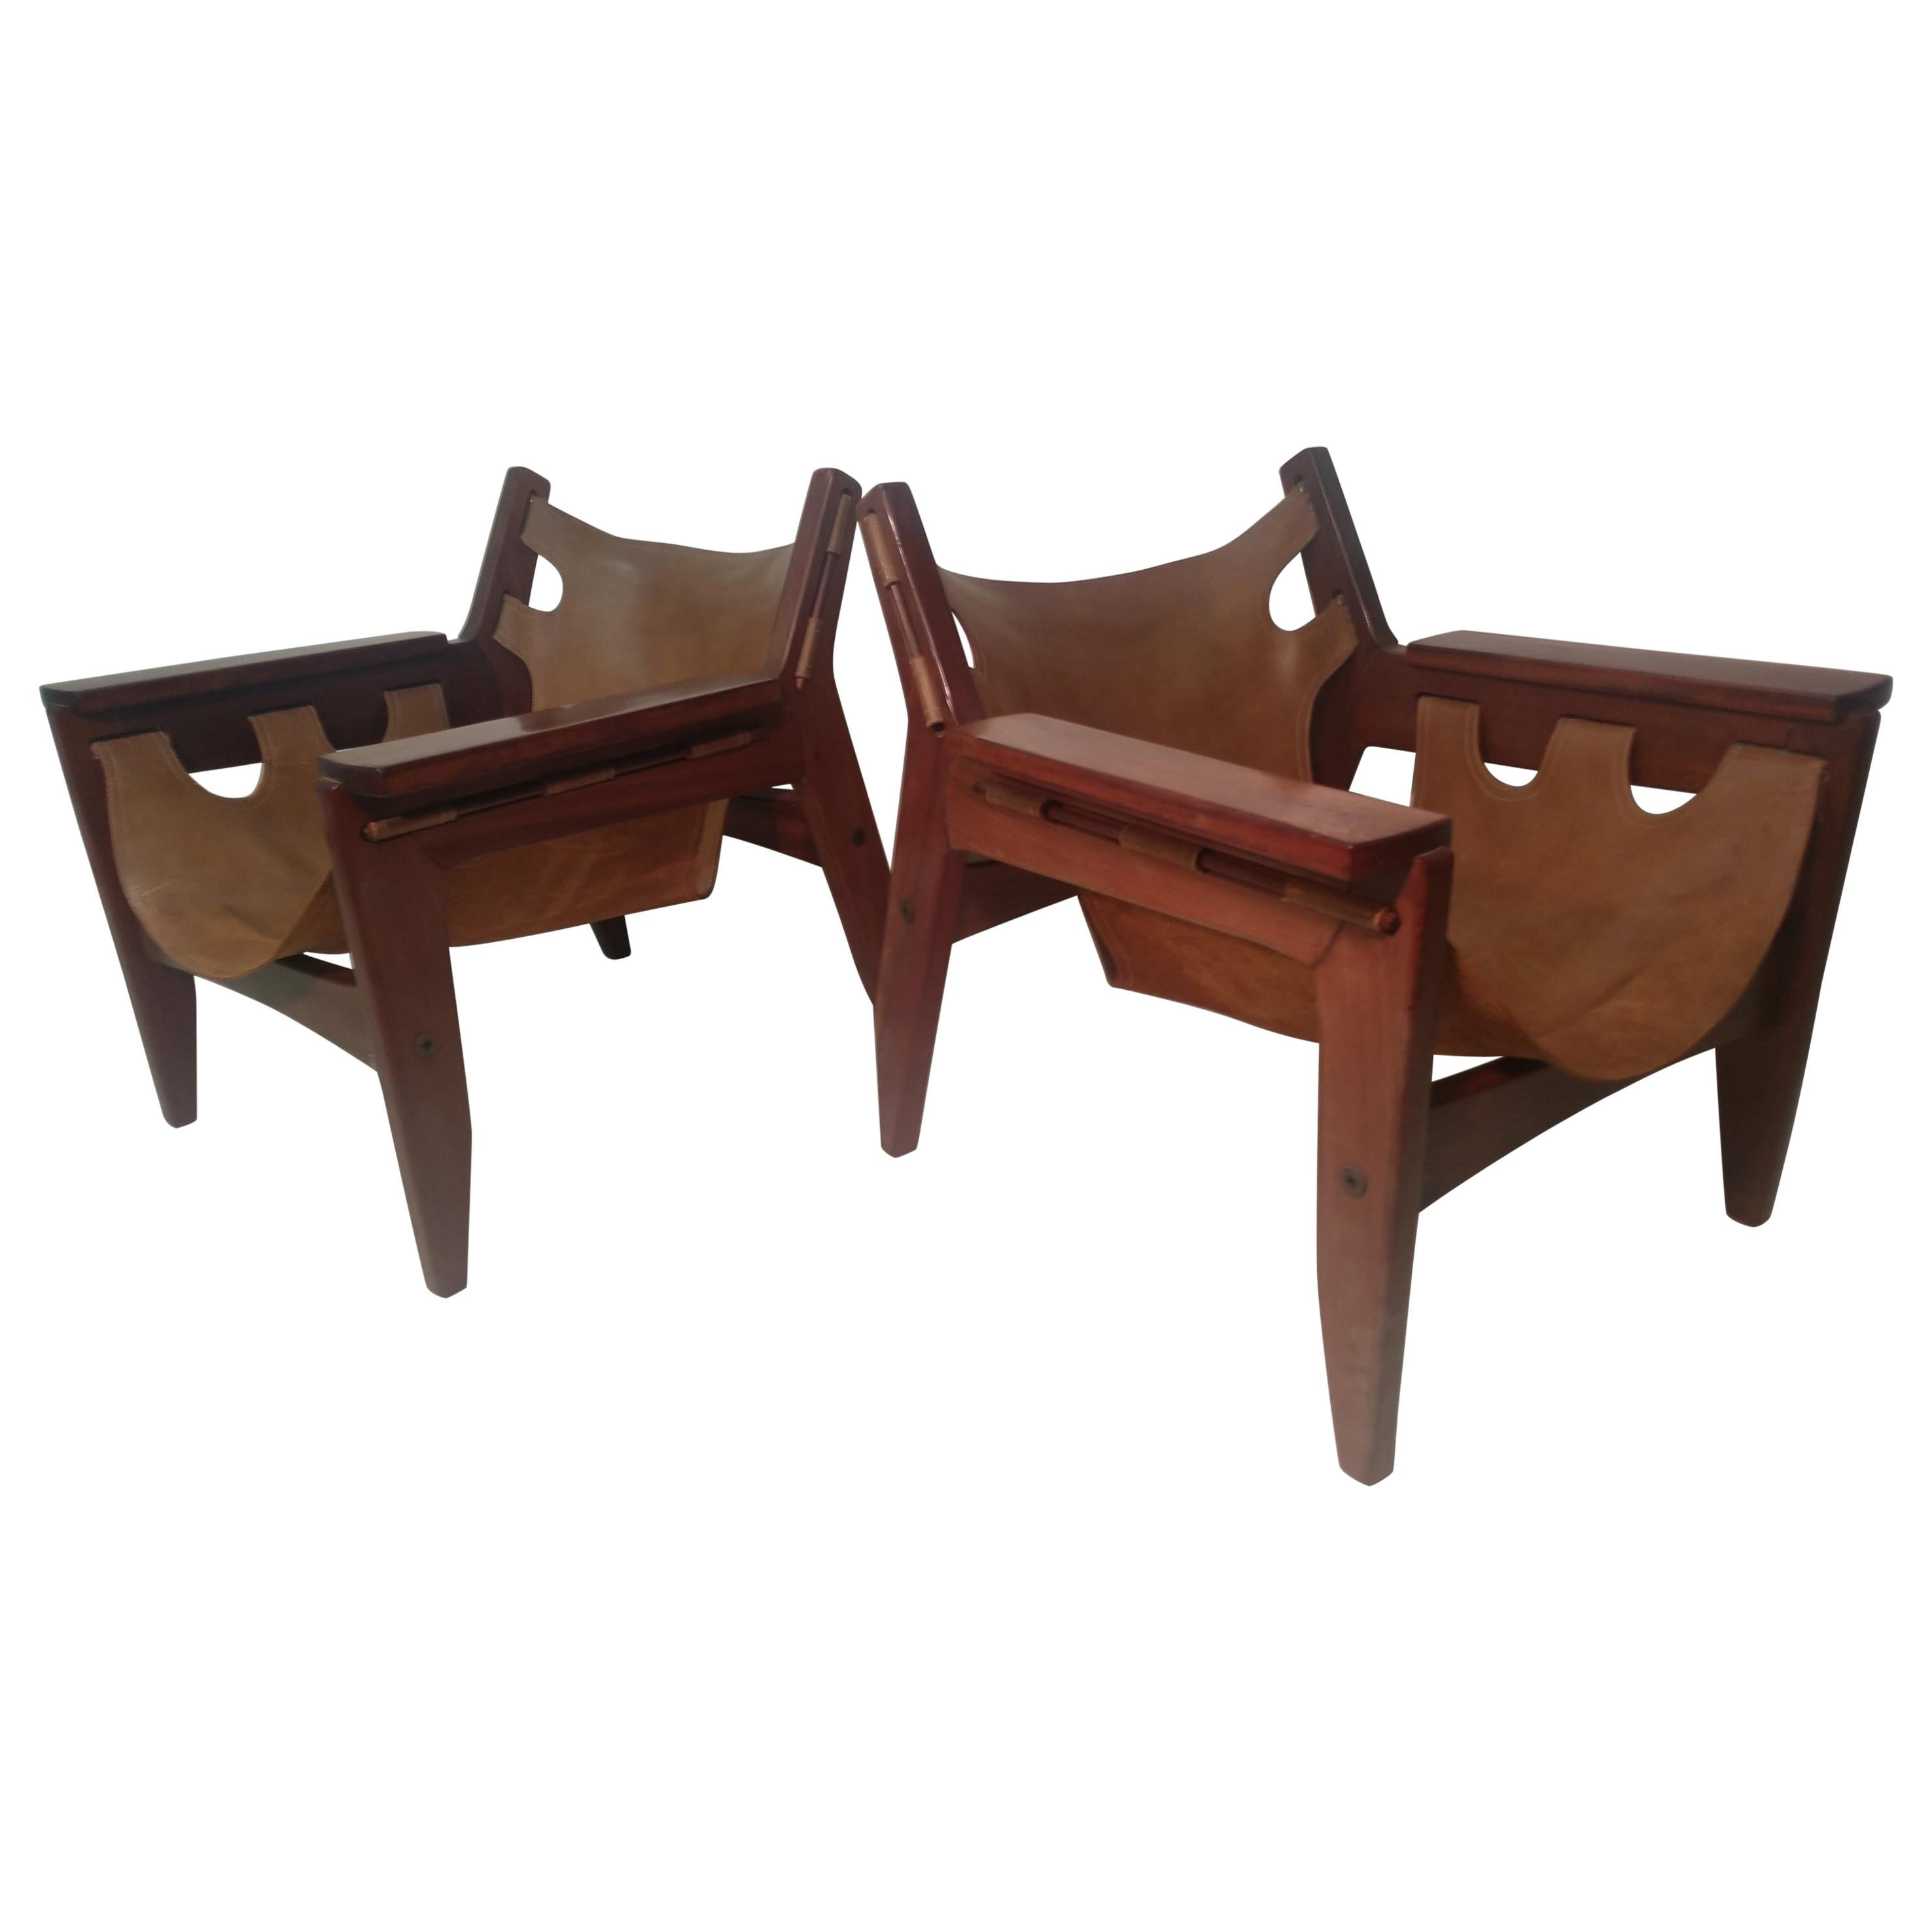 Pair of Mid-Century Modern Rosewood & Leather Lounge Chairs by Sergio Rodrigues